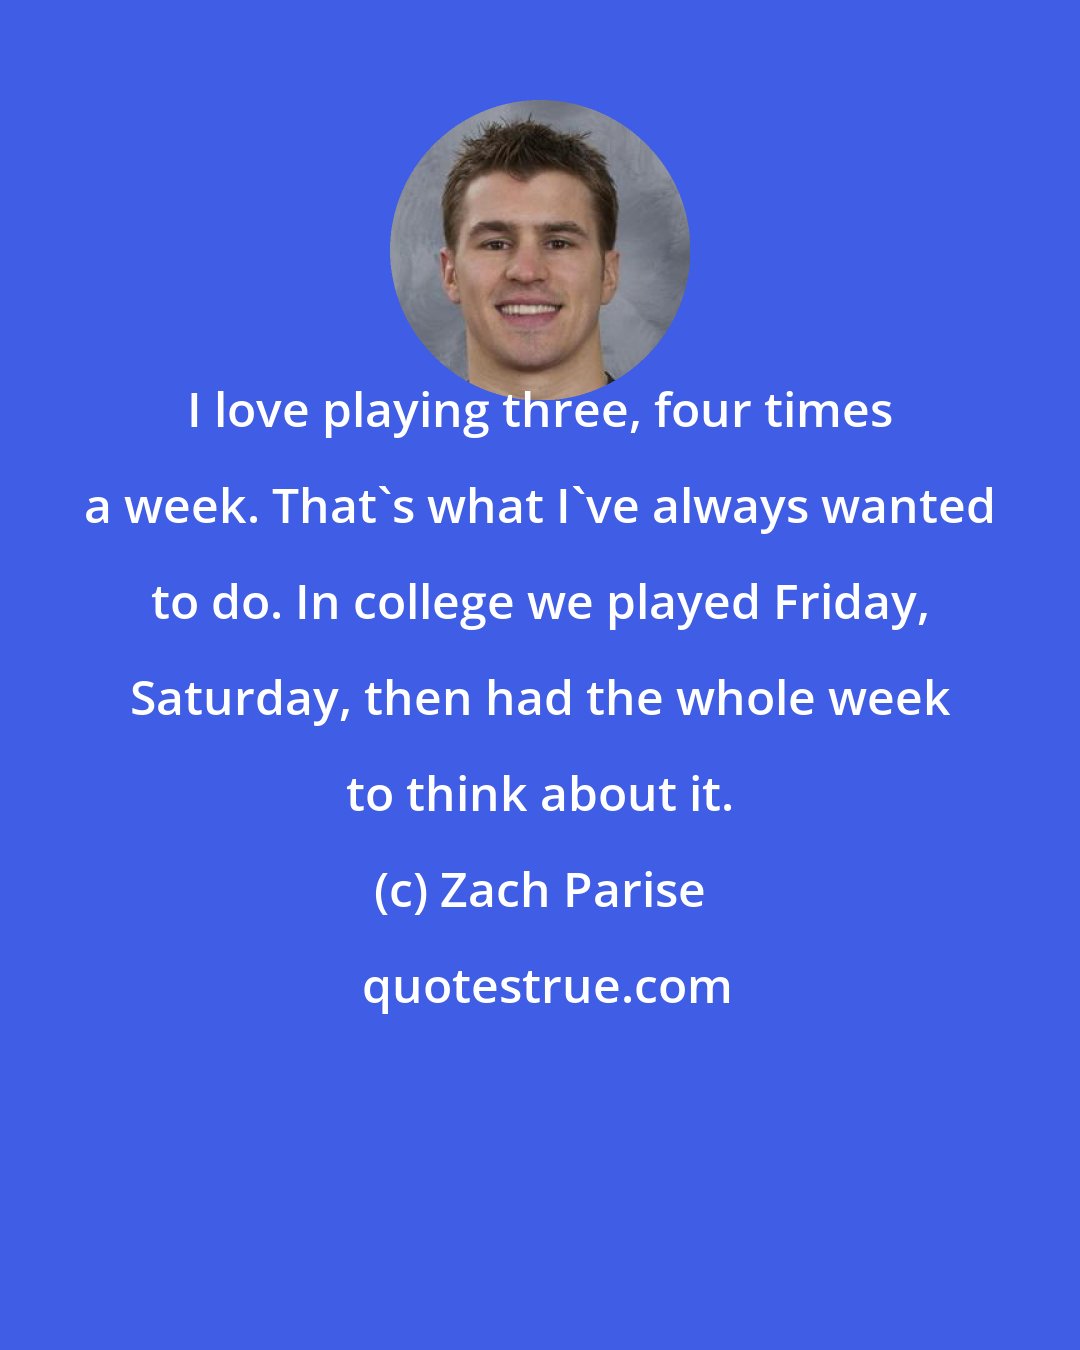 Zach Parise: I love playing three, four times a week. That's what I've always wanted to do. In college we played Friday, Saturday, then had the whole week to think about it.